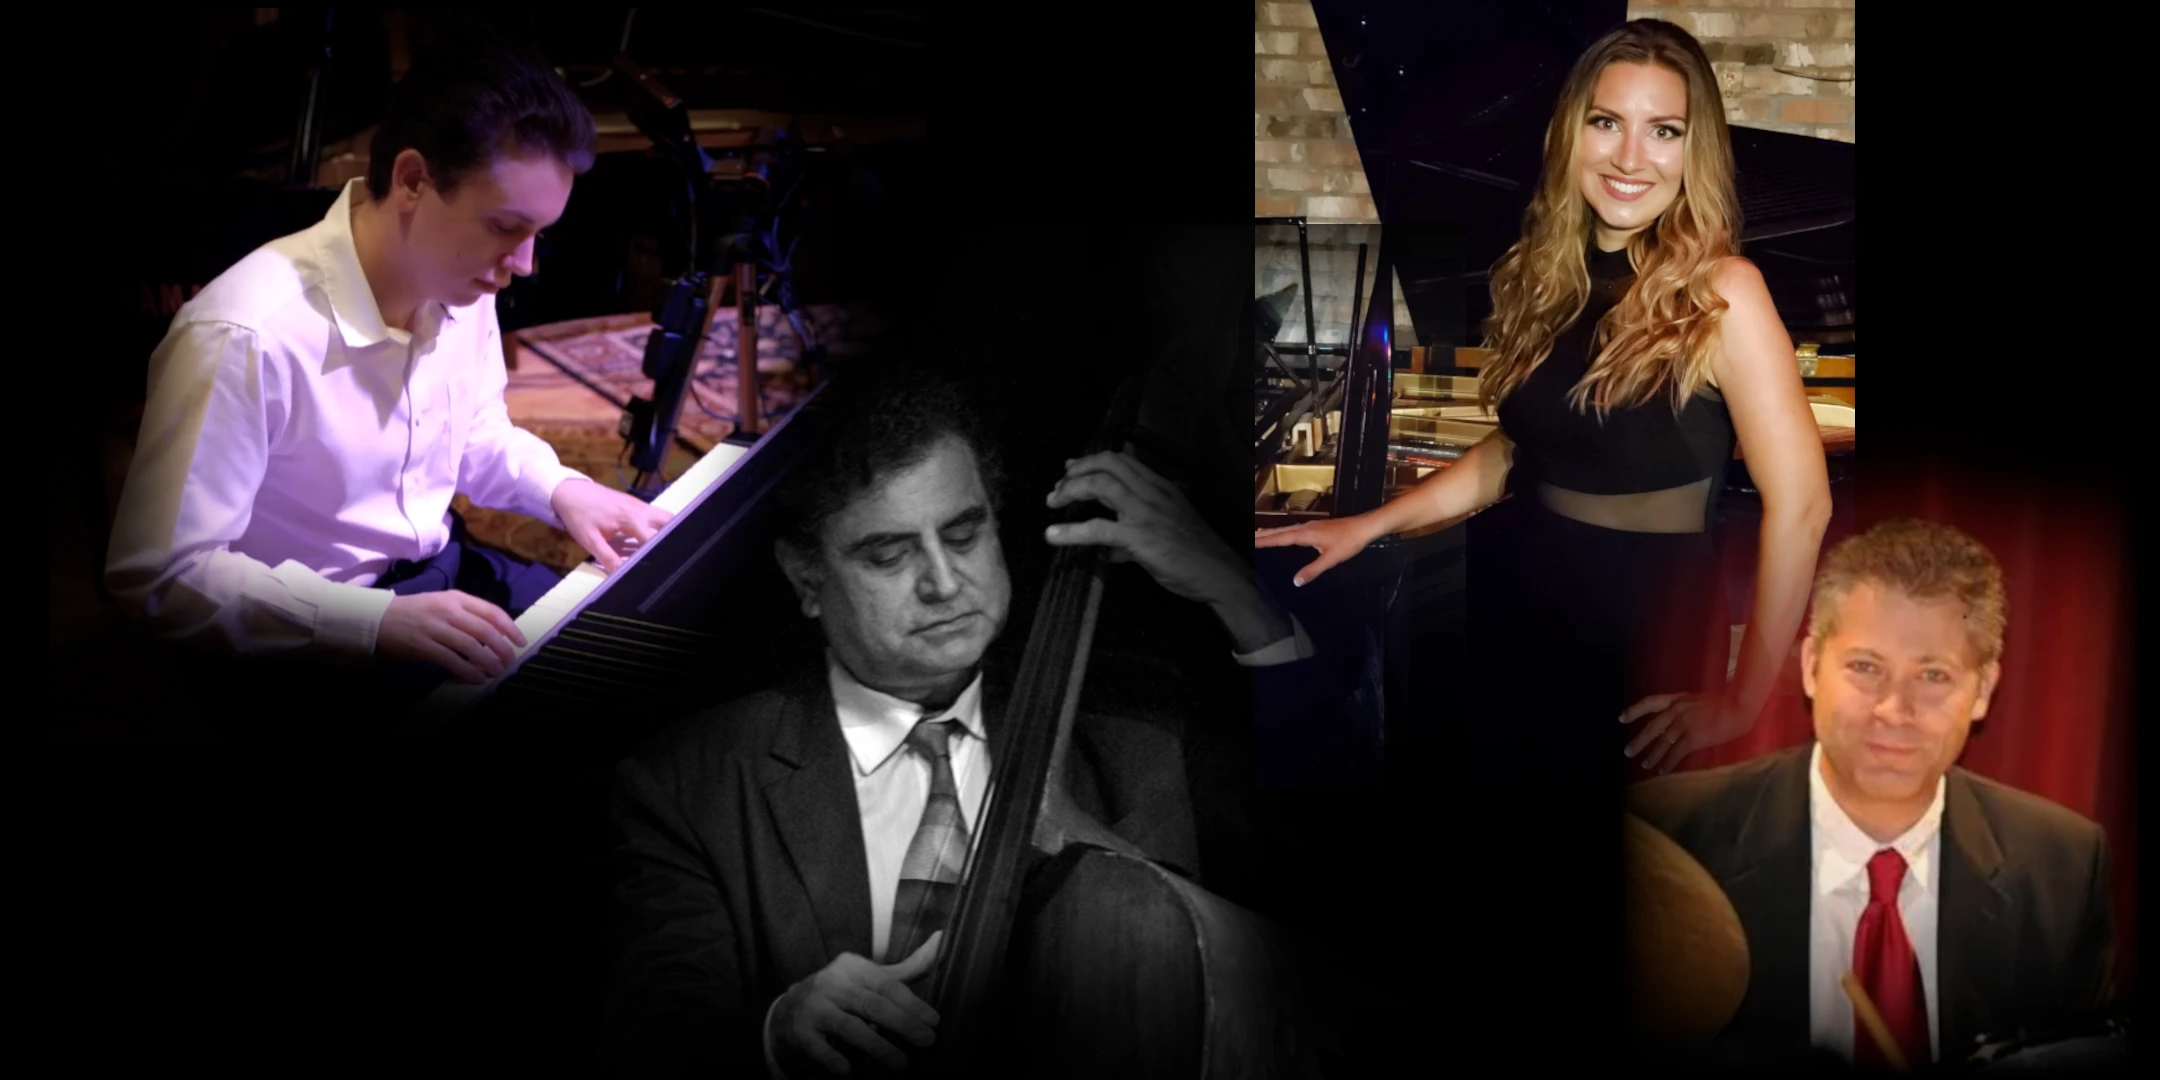 Upcoming Concert! James Hall trio with Special Guest Krissy Vavrek, vocals